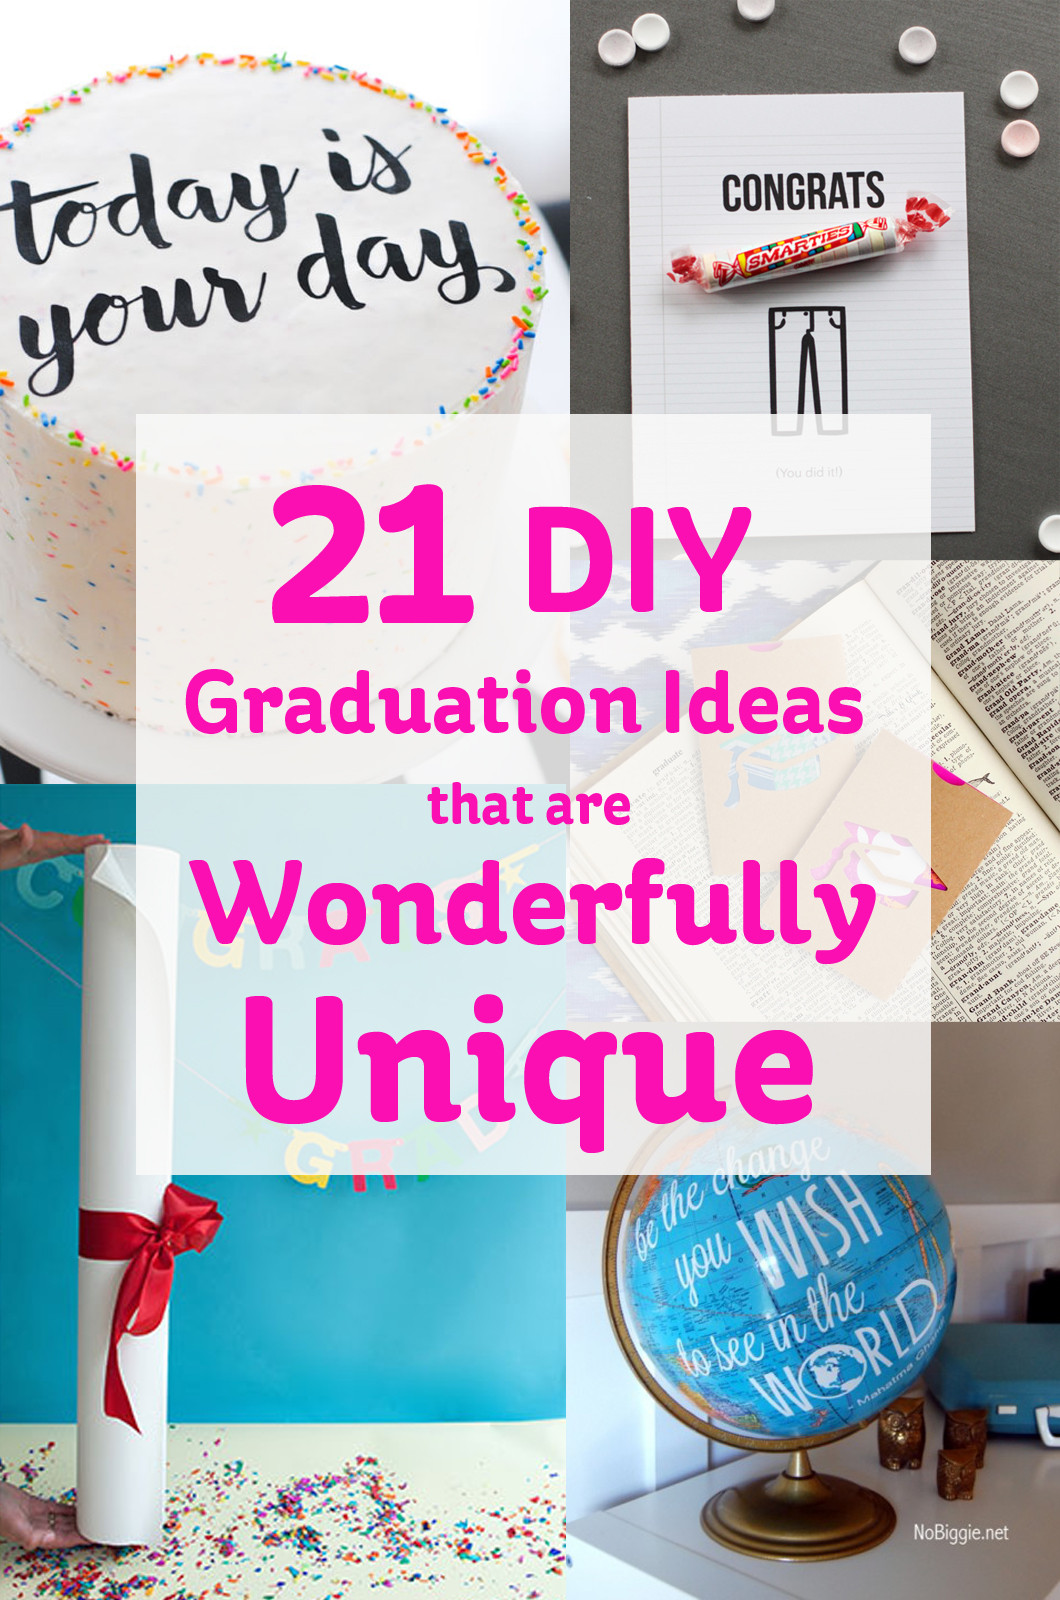 DIY Graduation Gifts For Him
 21 DIY Graduation Gifts that are Wonderfully Unique